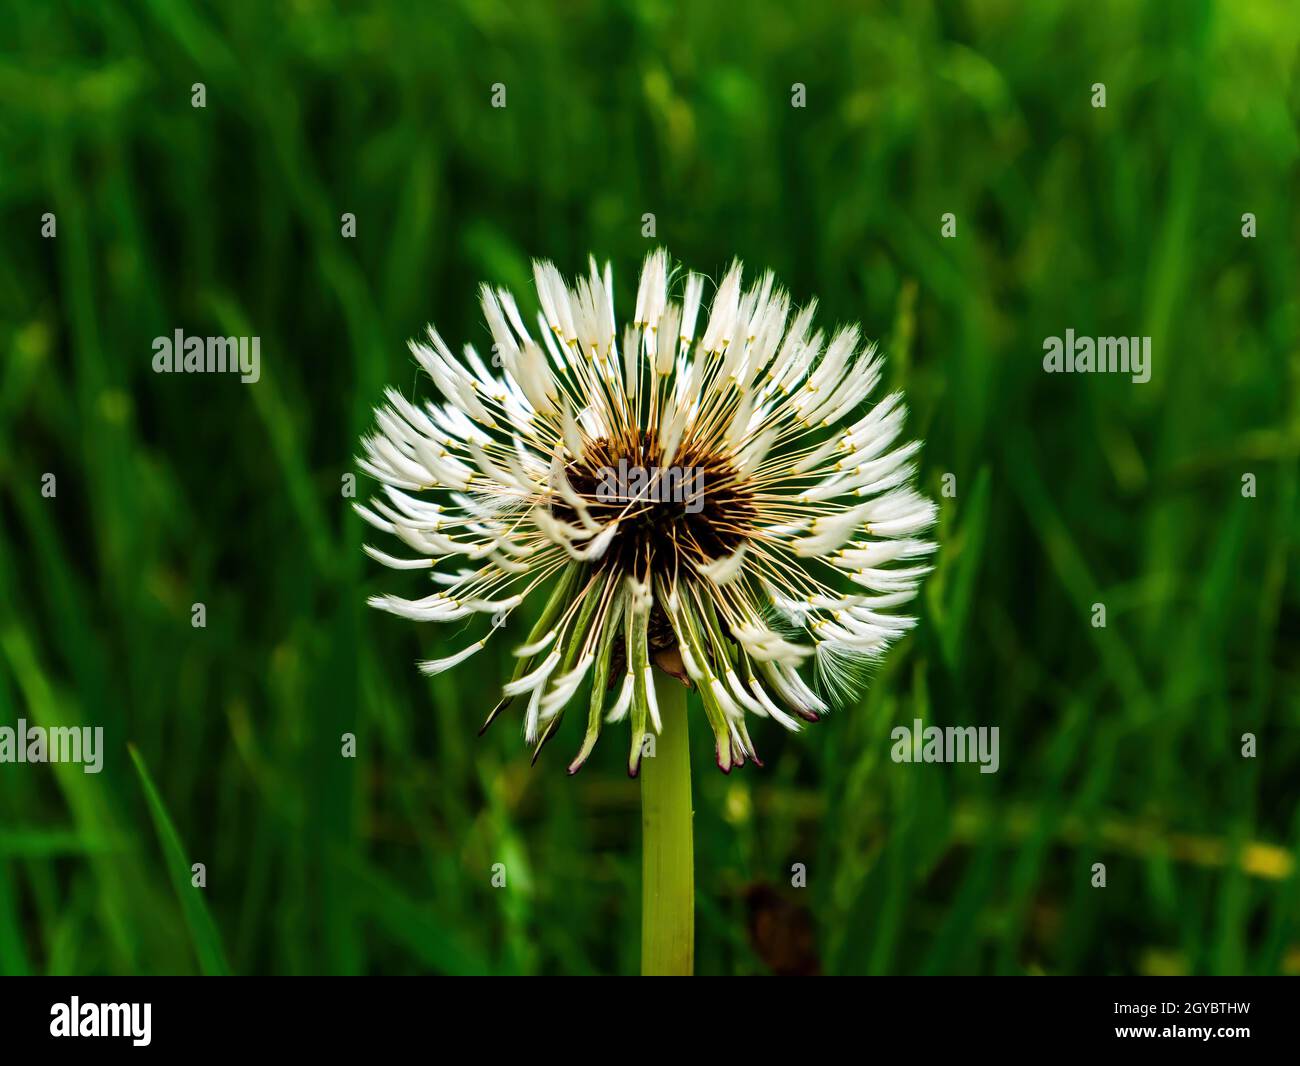 Dandelion flower with white seeds in green grass. Taraxacum plant. Dandelion seeds. Wildflowers. Green meadow. Ecosystem. Natural background. Spring s Stock Photo